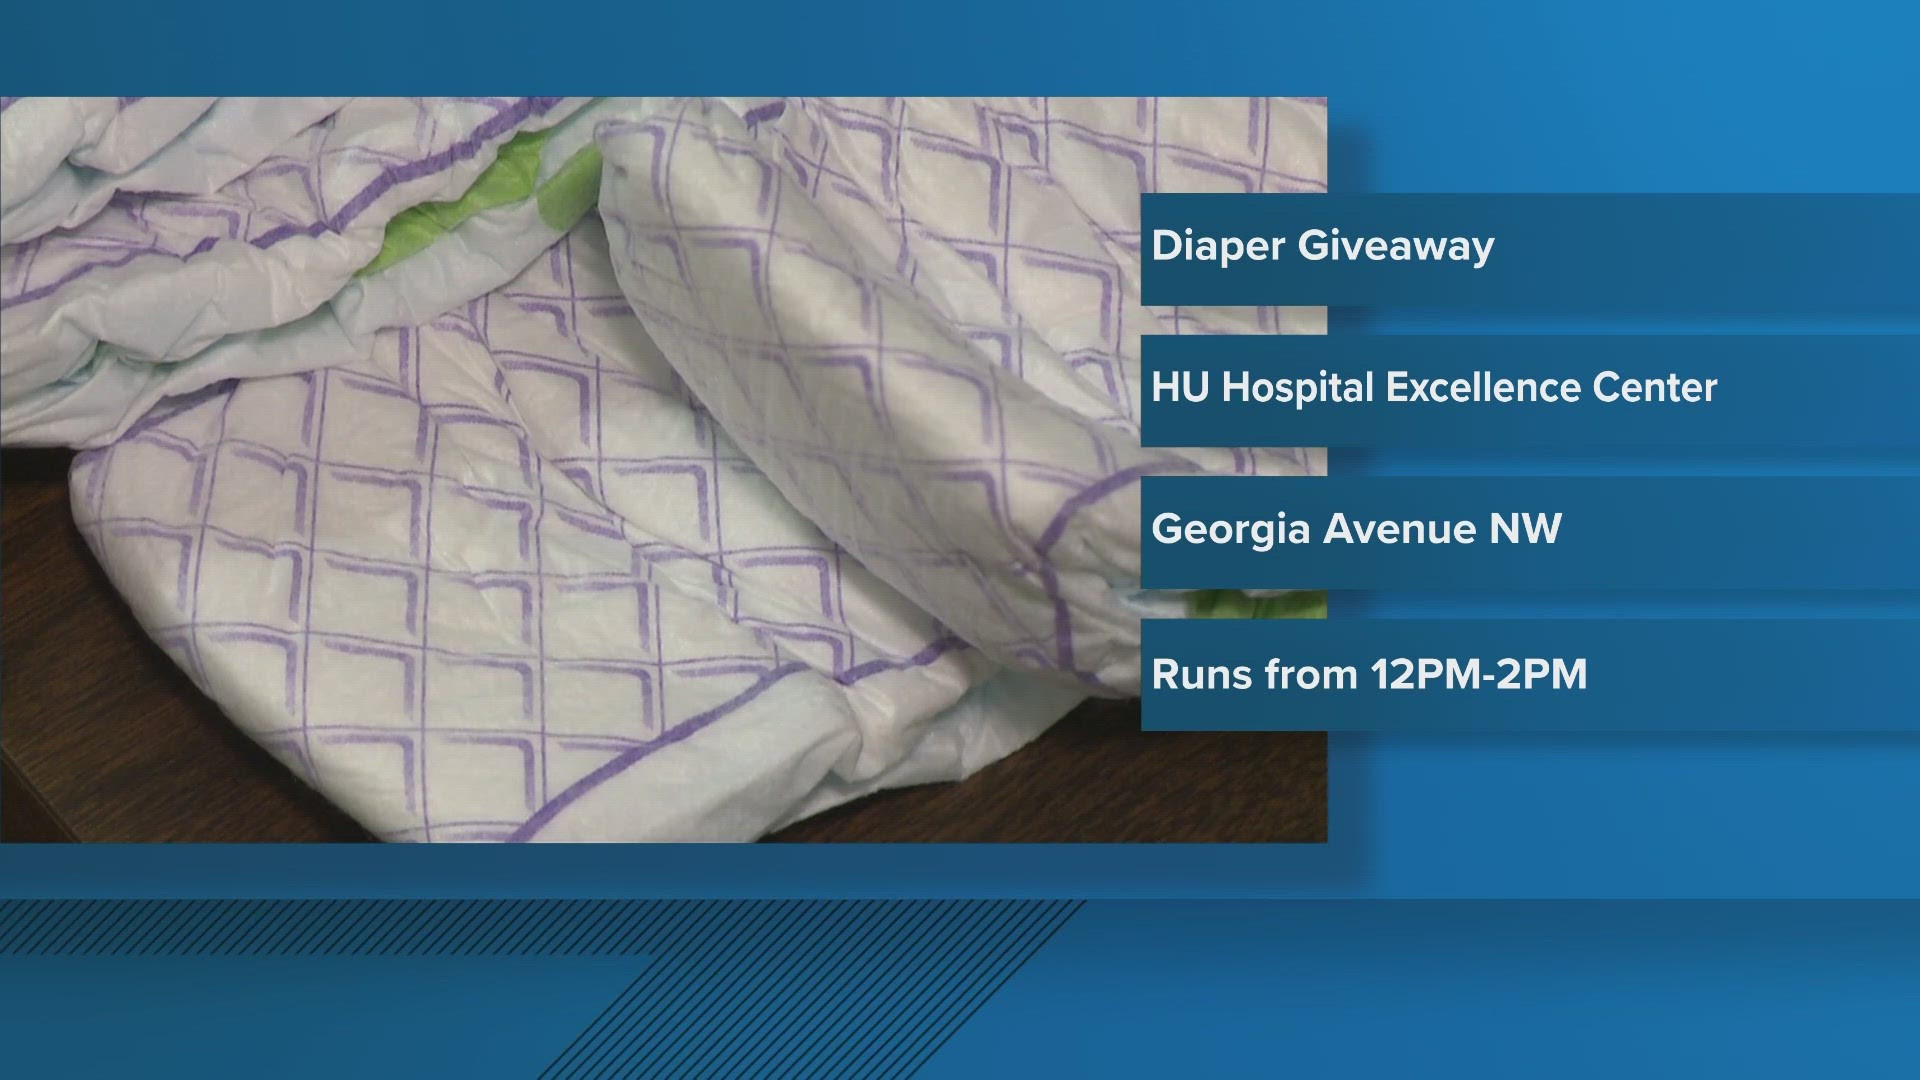 The non-profit, 'Ameri-Group DC' handed out free diapers and other baby products to families in Southwest.